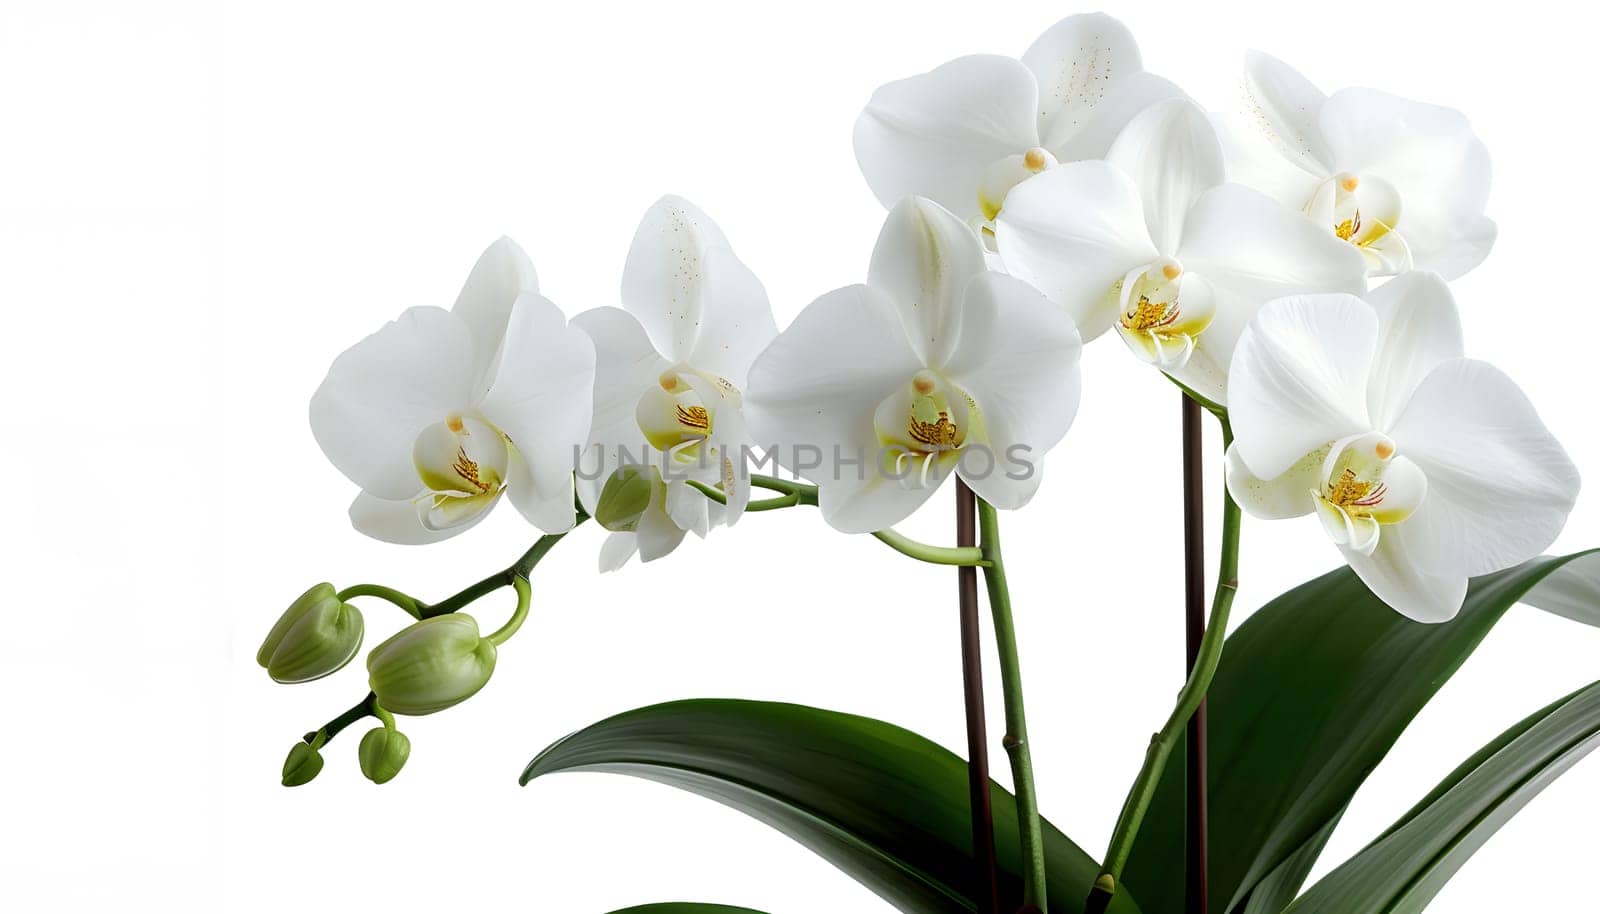 A close up of a beautiful white moth orchid with green leaves set against a white background, showcasing its delicate petals and terrestrial plant characteristics